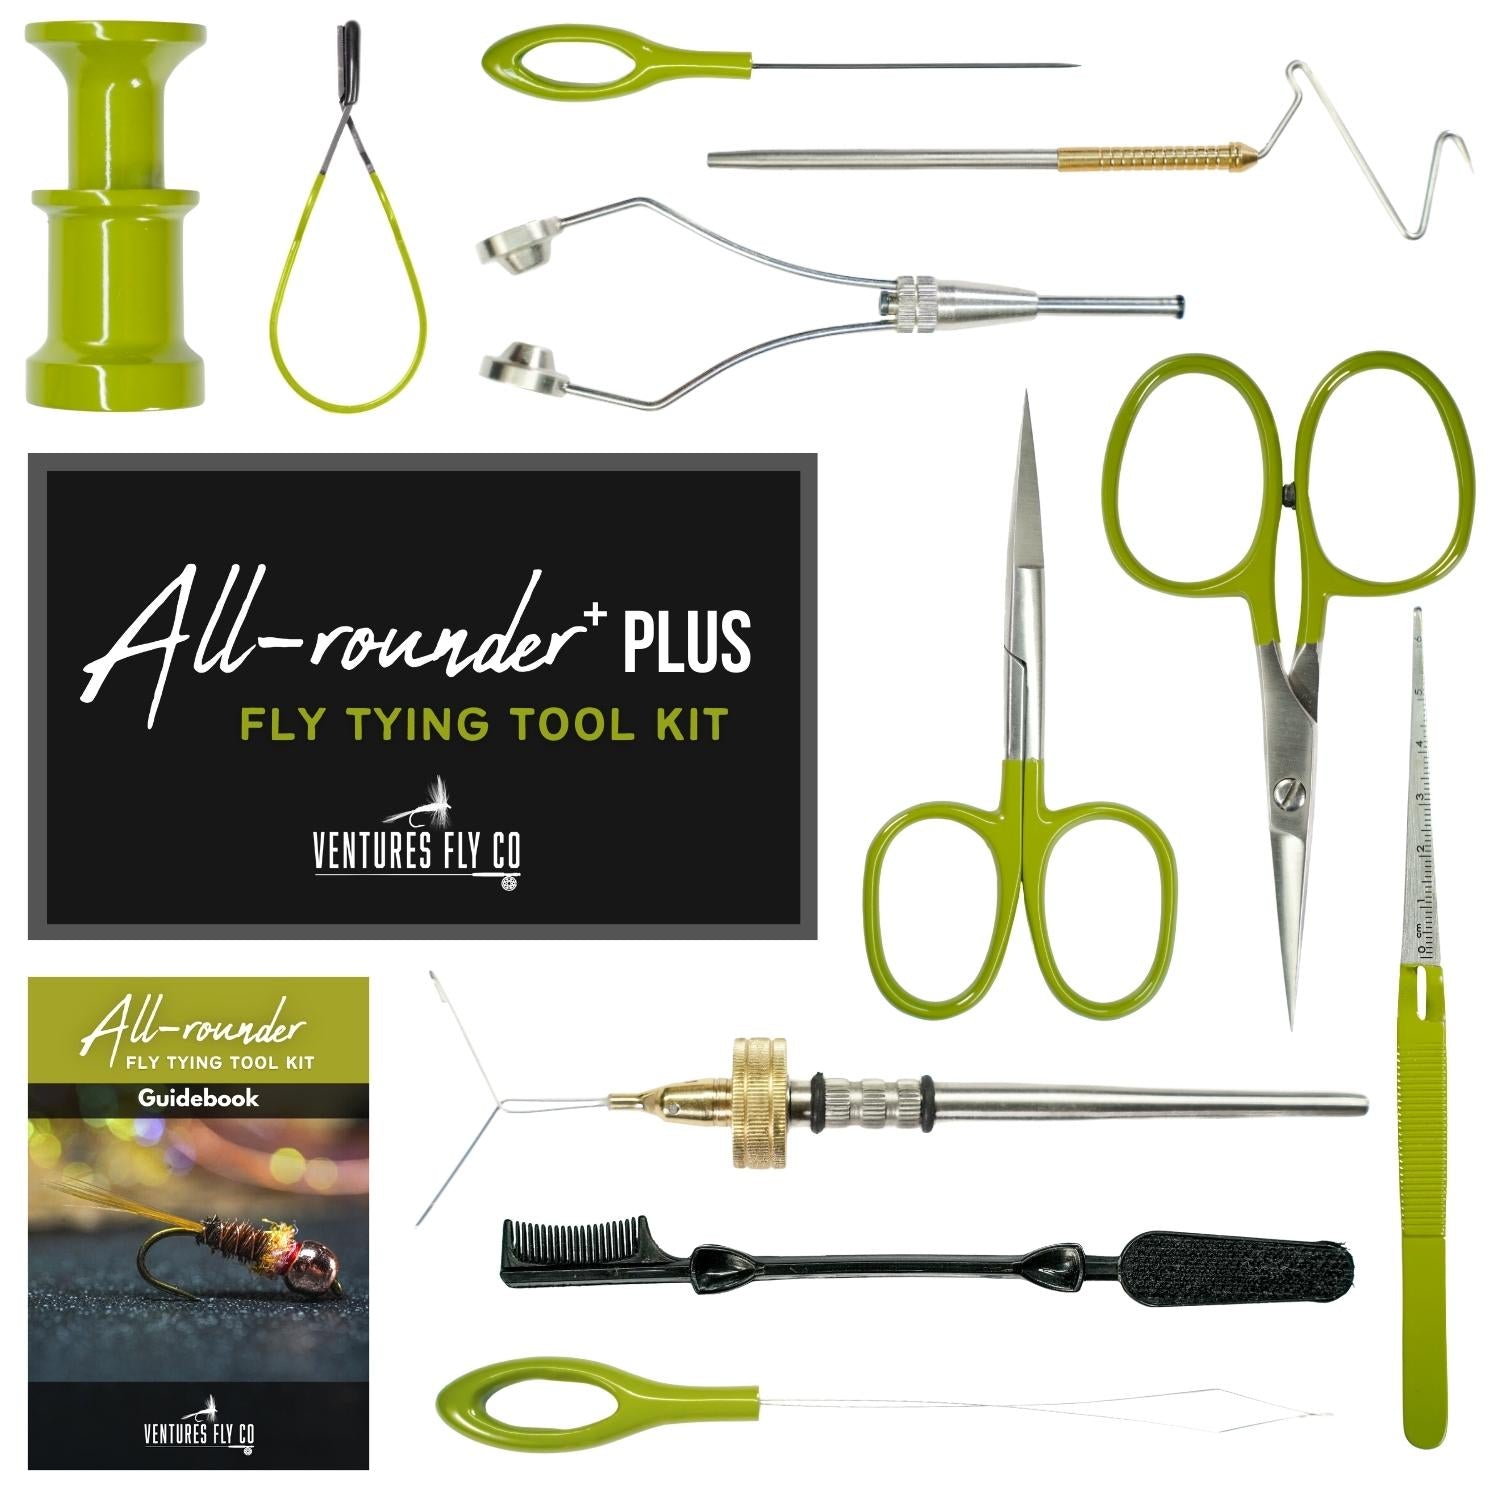 Fly Tying – Ventures Fly Co